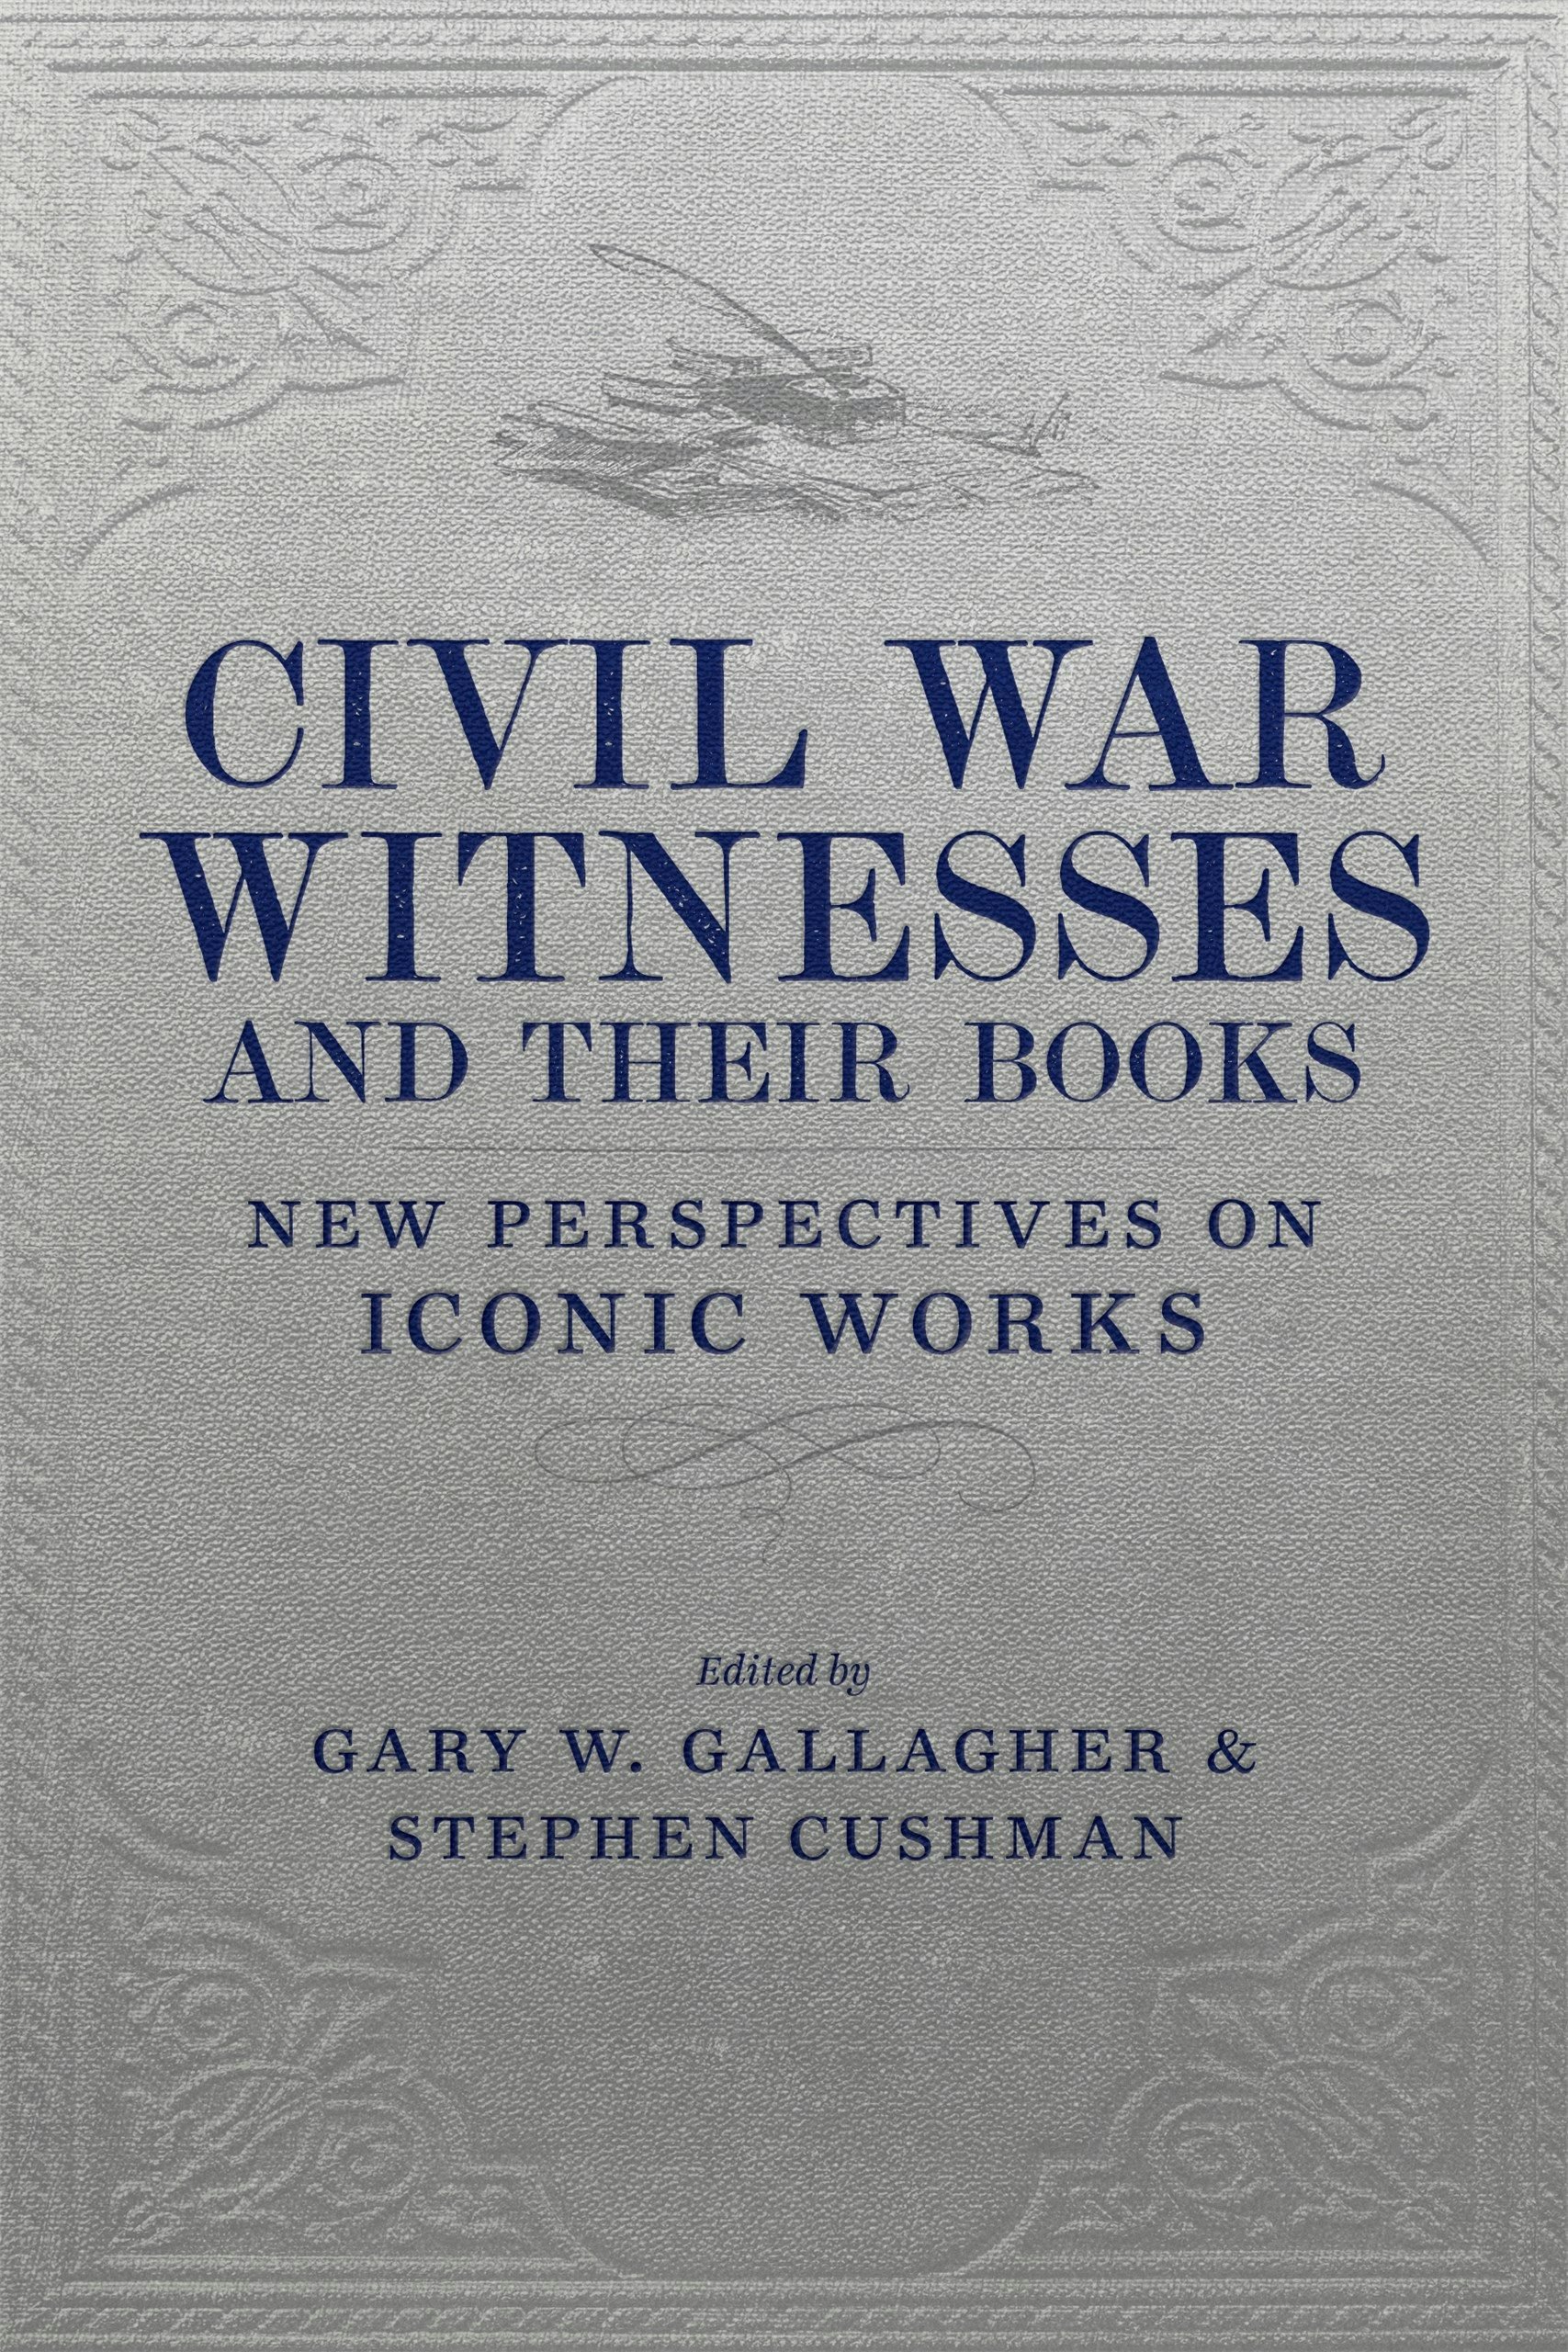 One Widow’s Wars: The Civil War, Reconstruction, and the West in Elizabeth Bacon Custer’s Memoirs